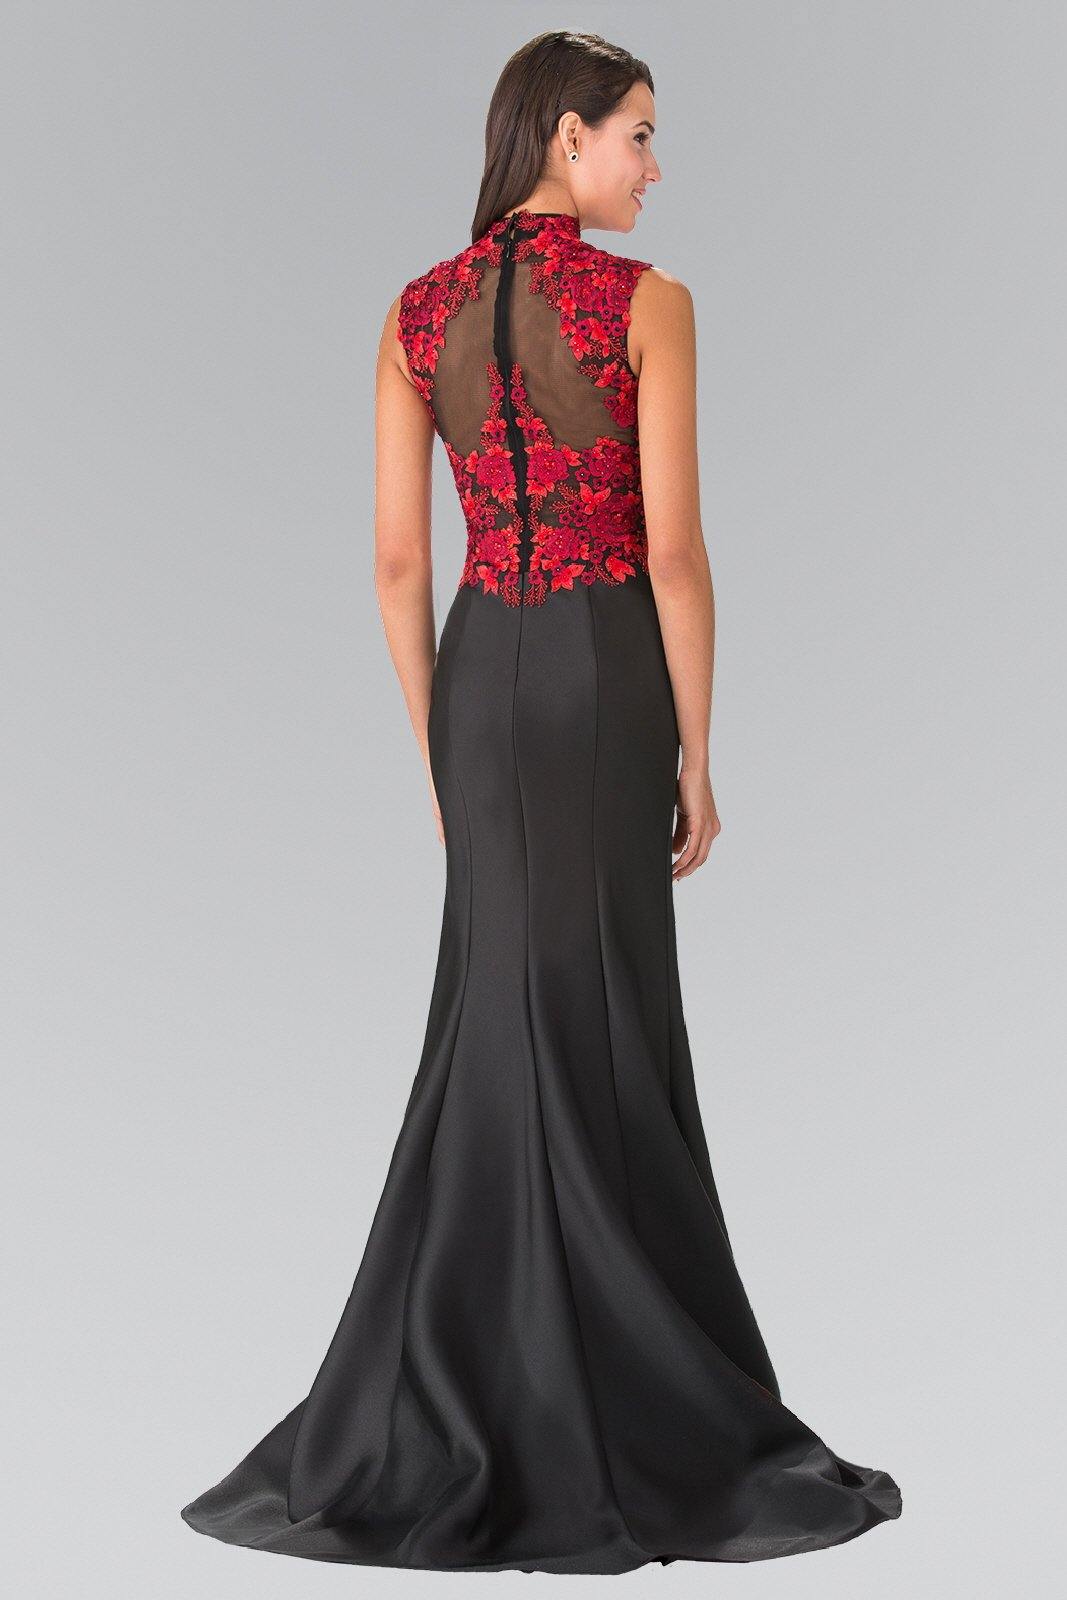 Long Prom Dress with Illusion Embroidered Bodice - The Dress Outlet Elizabeth K